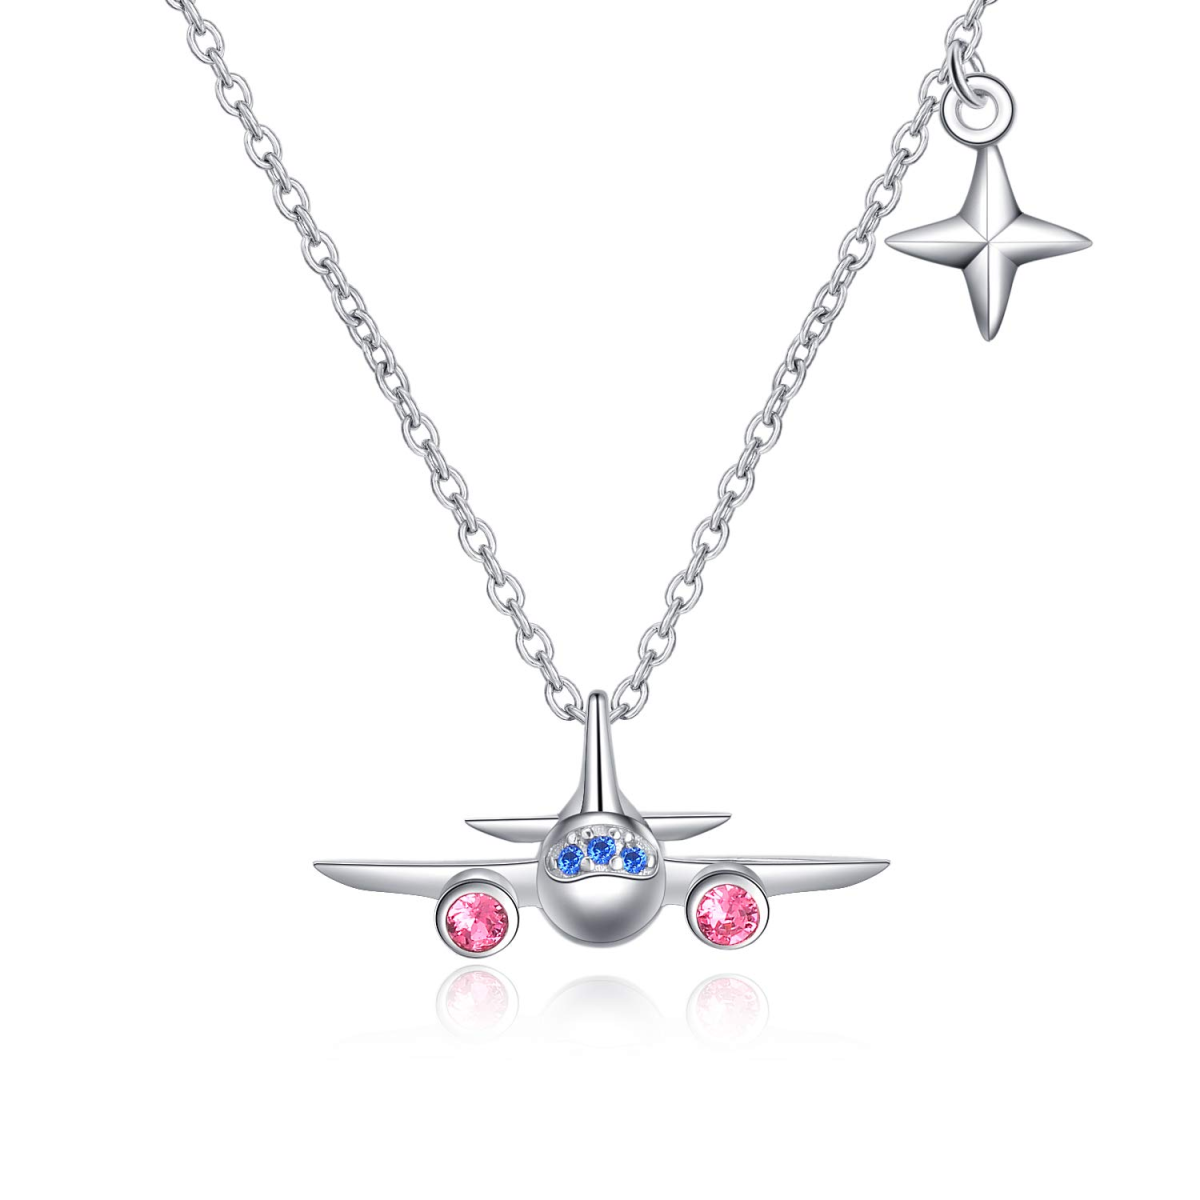 Sterling Silver Circular Shaped Crystal Airplane & Star Pendant Necklace-1